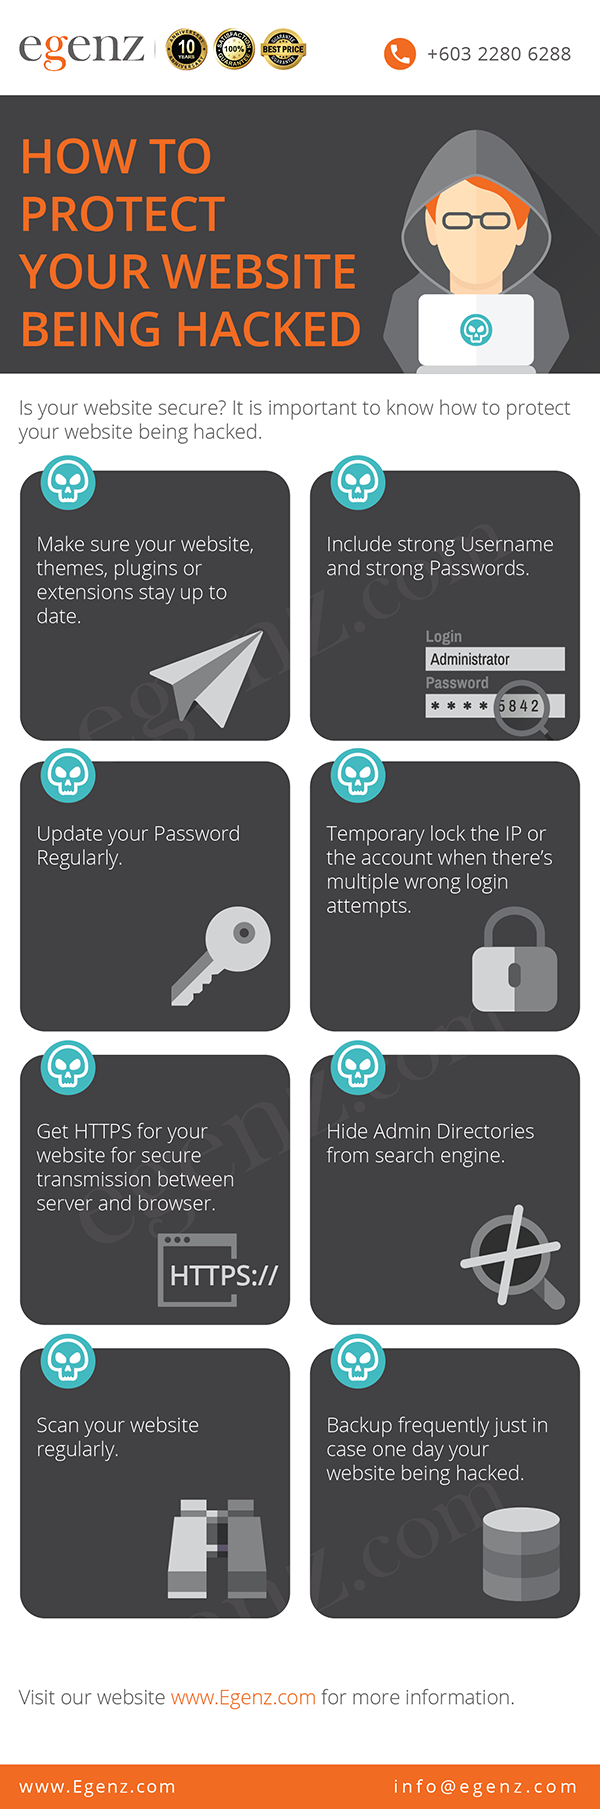 Infographic-How-to-protect-your-Website-being-hacked-Egenz.com